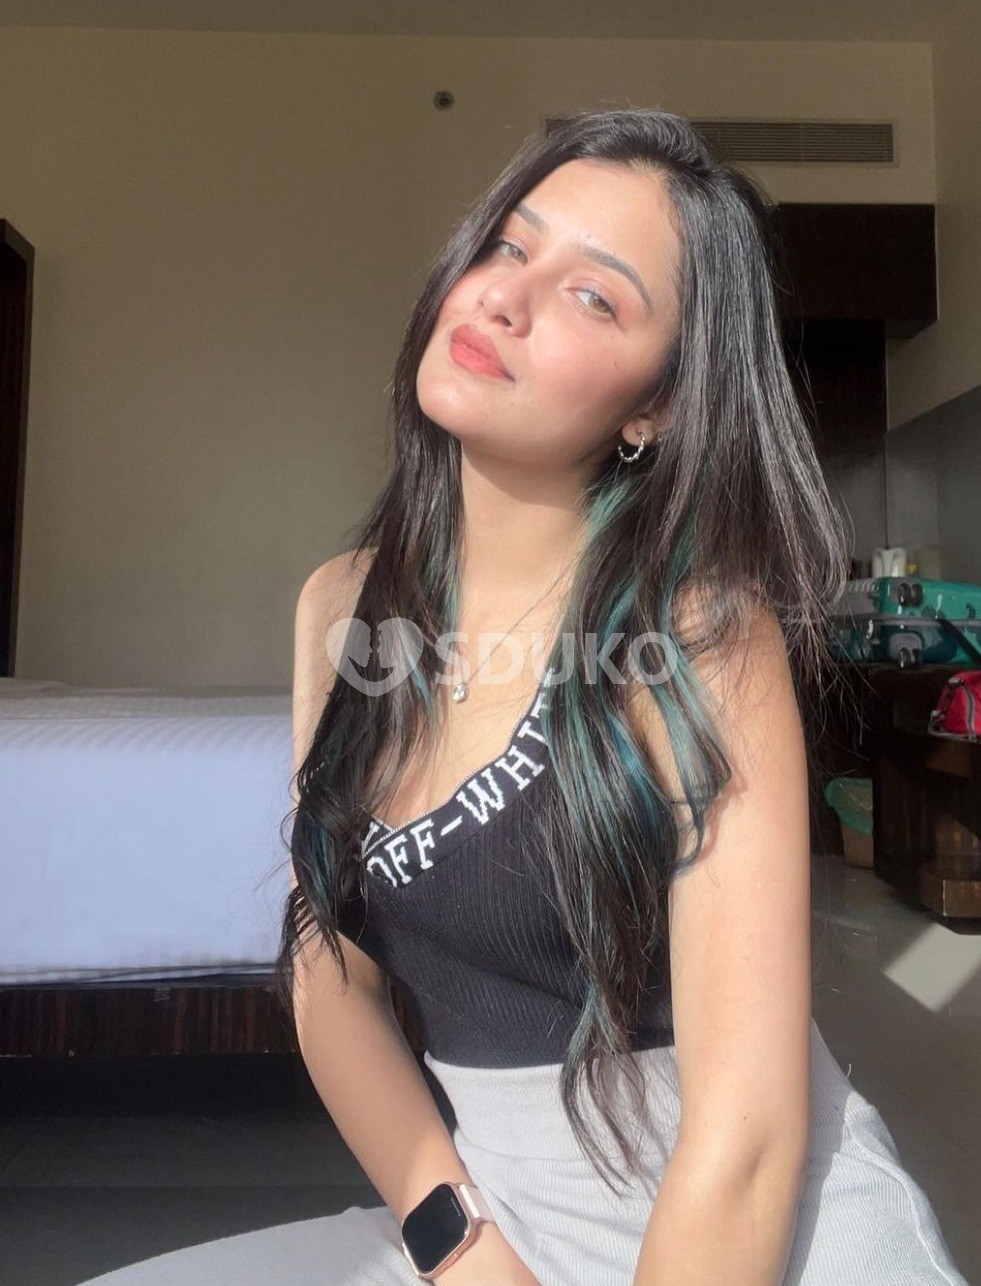 Nagpur ✅ 24x7 AFFORDABLE CHEAPEST RATE SAFE CALL GIRL SERVICE AVAILABLE OUTCALL AVAILABLEjok